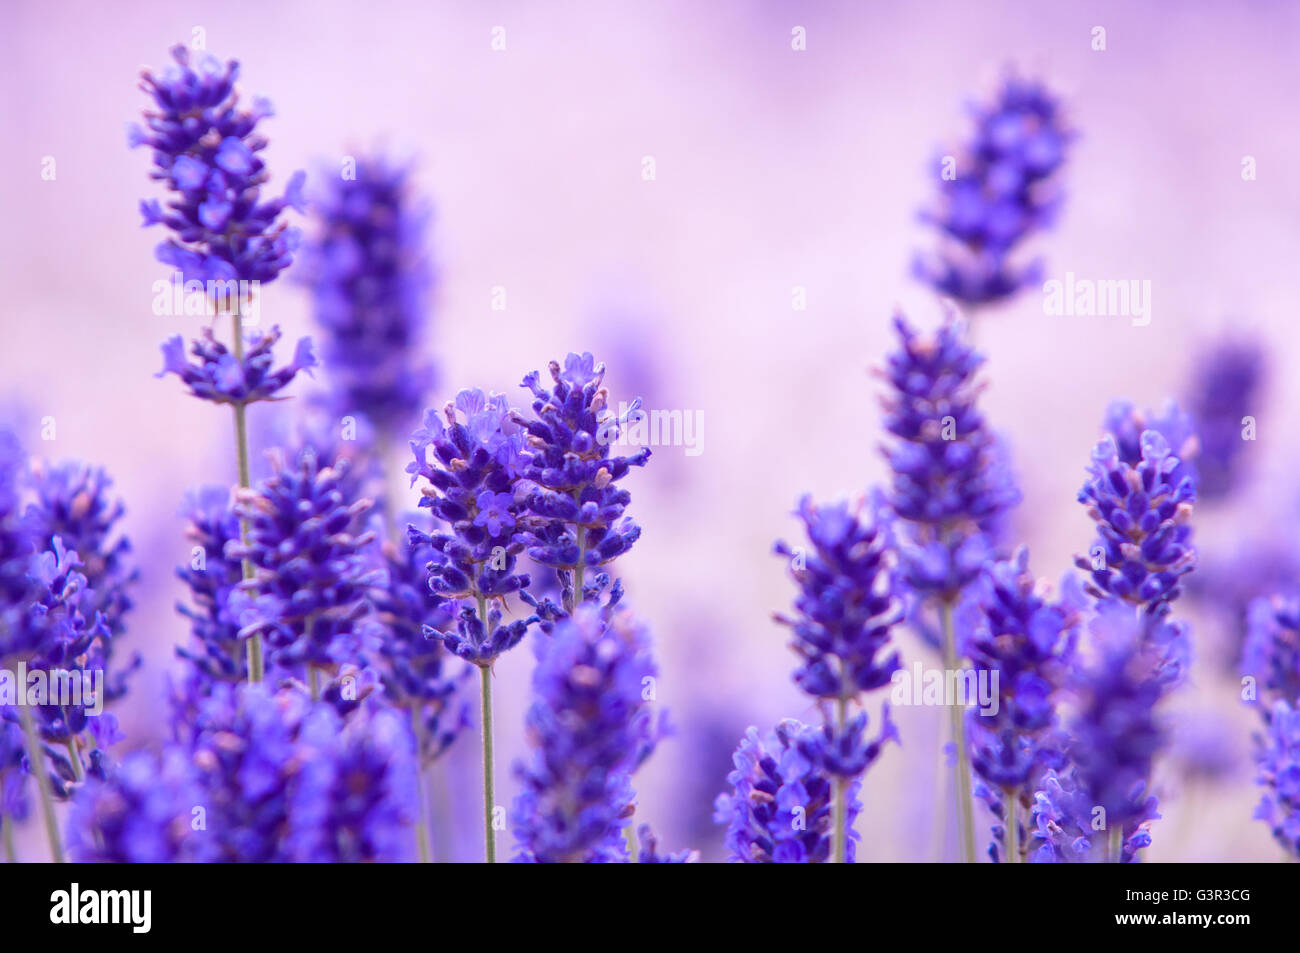 Lavender flower, violet Lavender flowers in nature with copy space, Lavandula Stock Photo